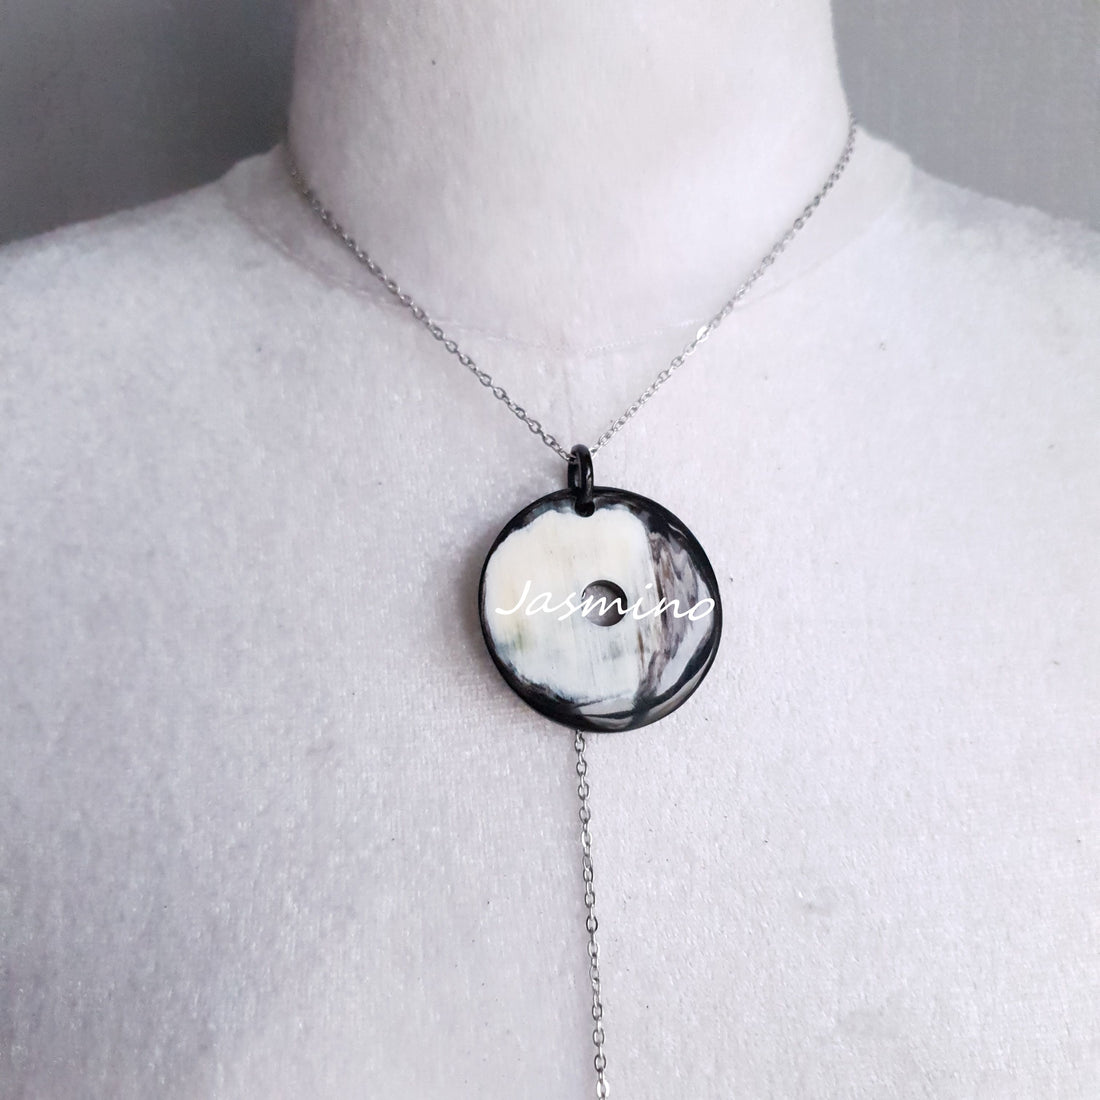 <img src="buffalo horn necklace.jpg" alt="This necklace has a circle pendant in natural light, unique gift for her">